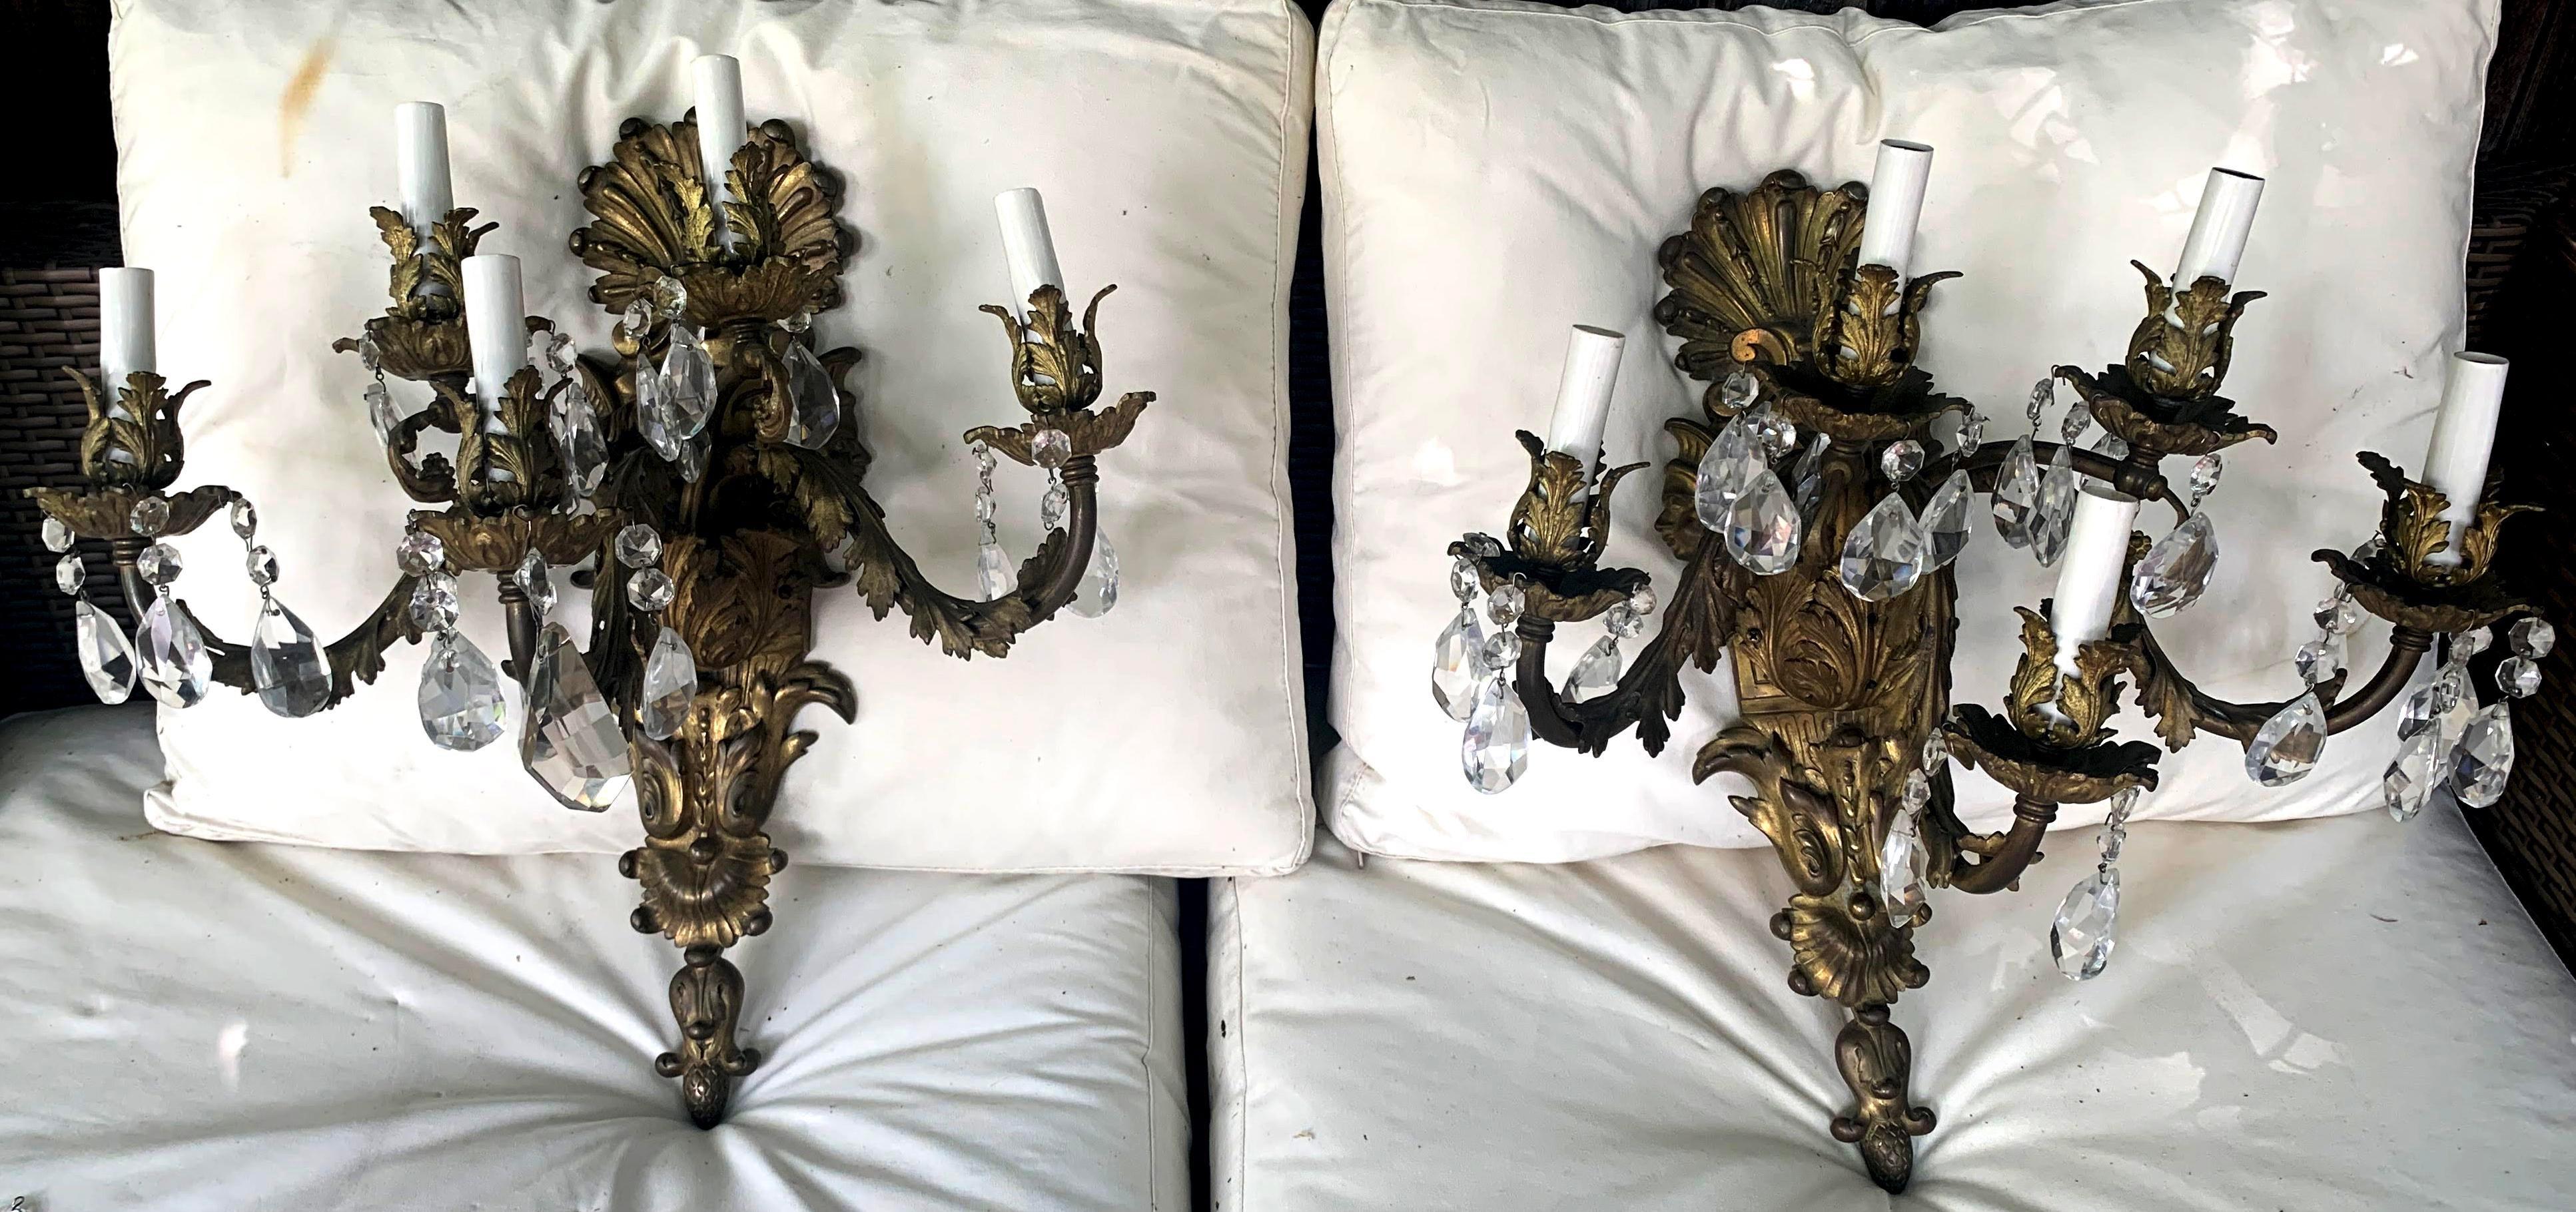 Gorgeous Pair of French Rococo Gilt Bronze and Crystal Sconces, Circa 1780. This detailed sconce features acanthus motif throughout, even at the base of each candle. The heavy cast bronze detail highlights the intricacies of each leaf. Beautifully